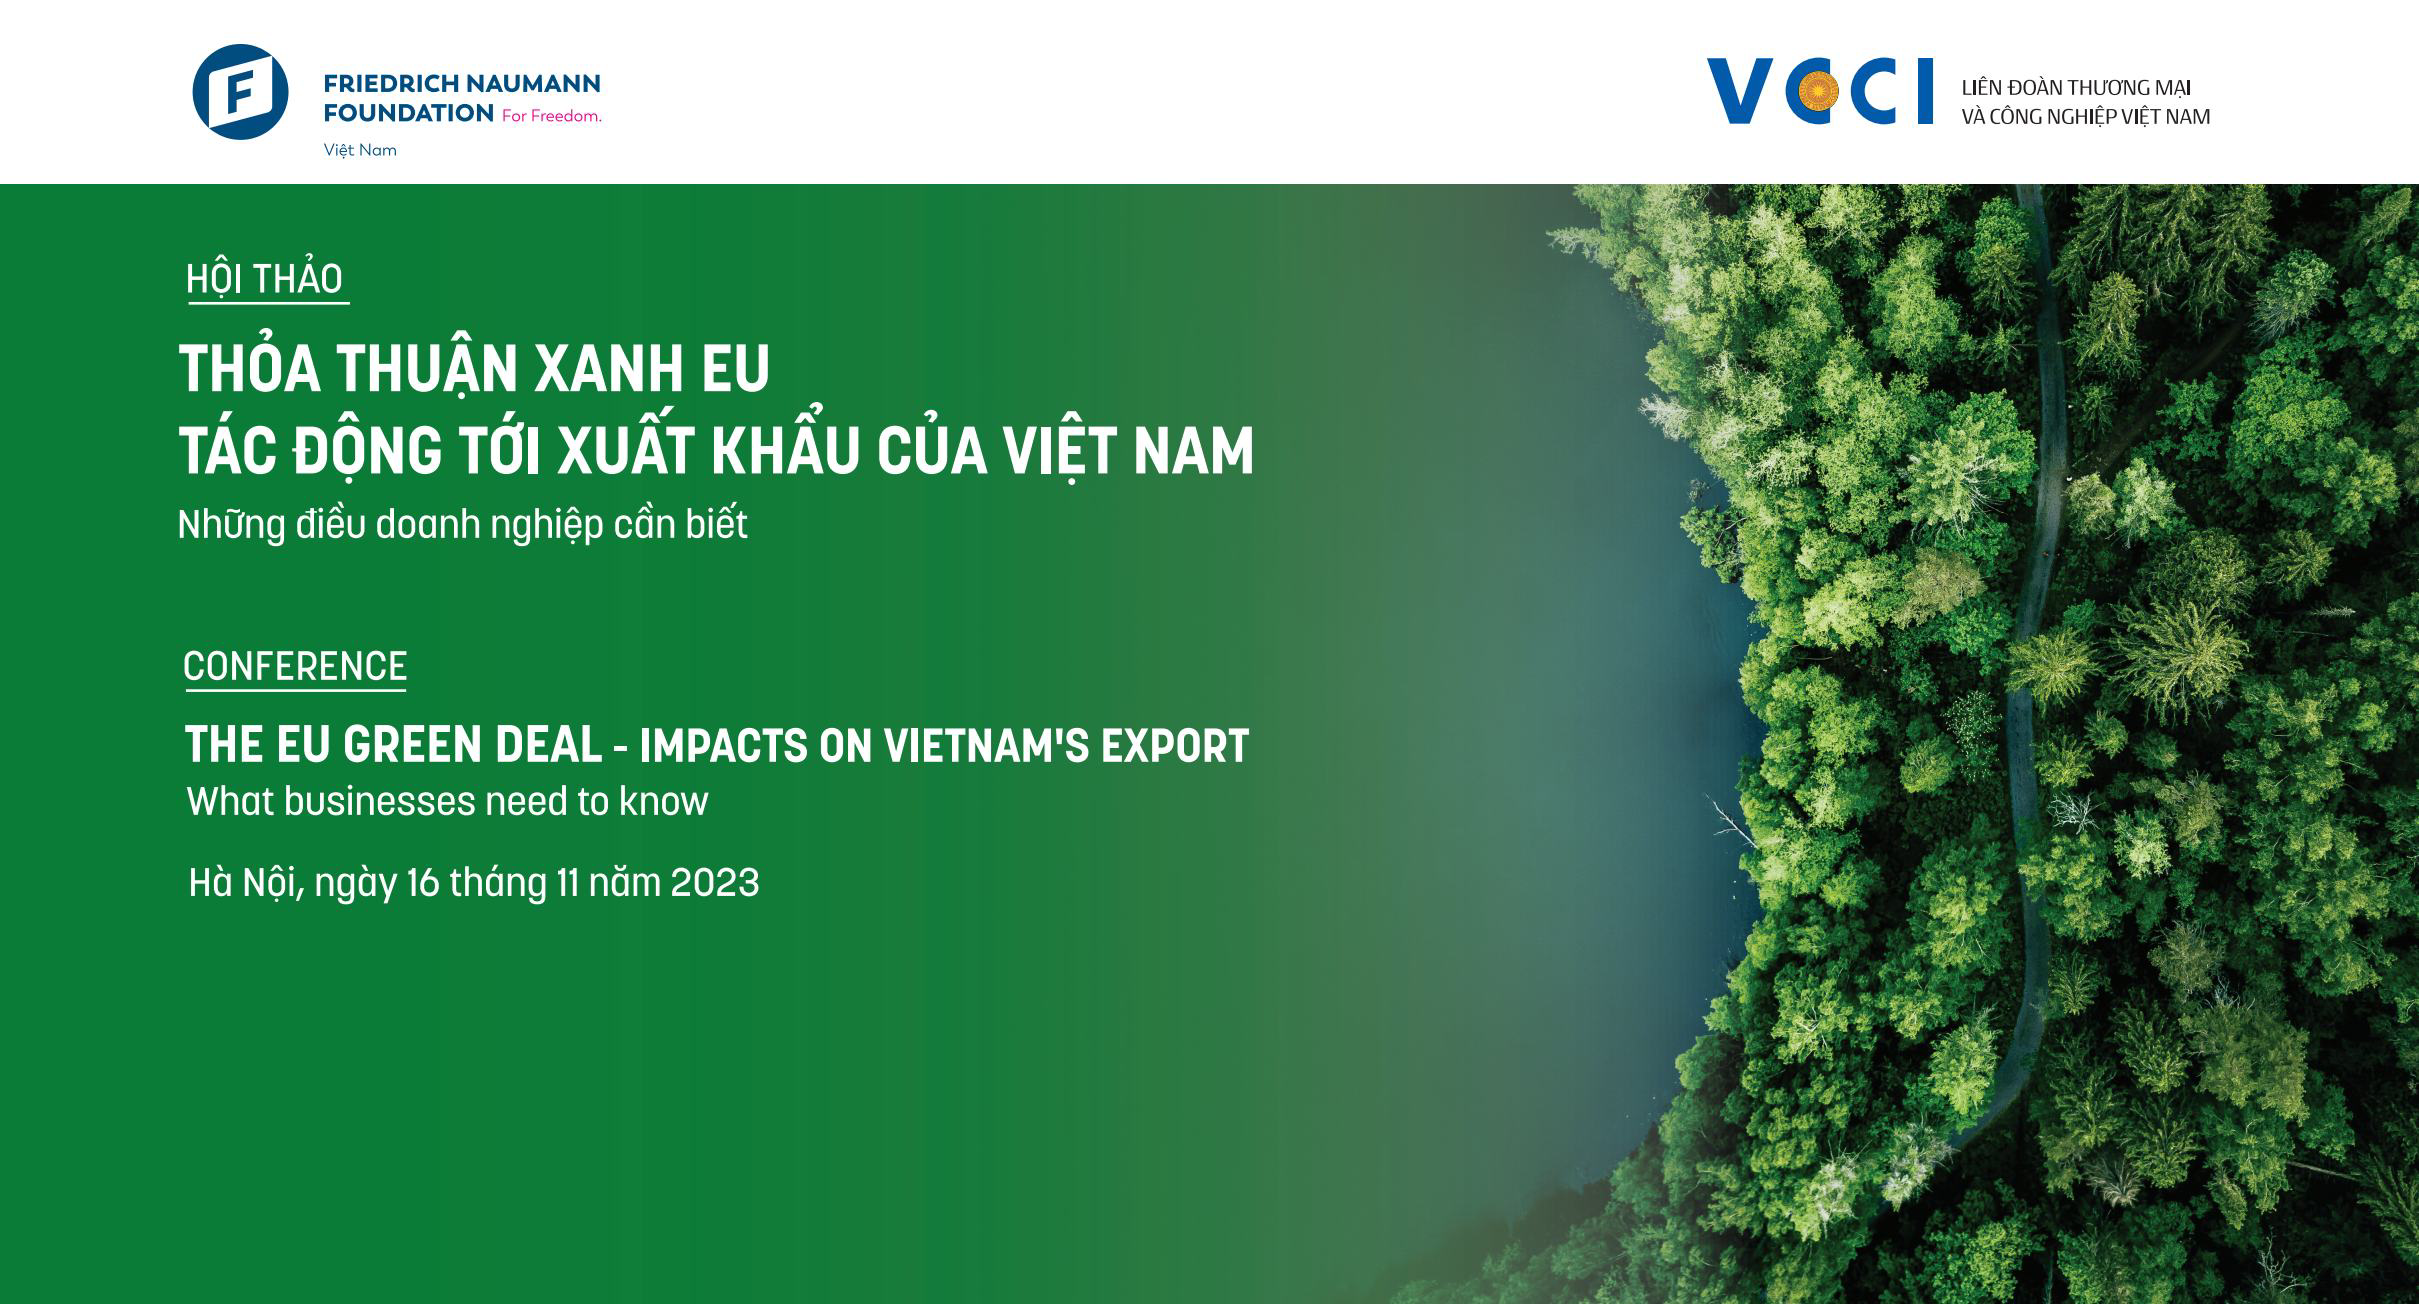 Thumbnail - FNF Vietnam & VCCI Conference on EU Green Deal and its Impact on Vietnam's export